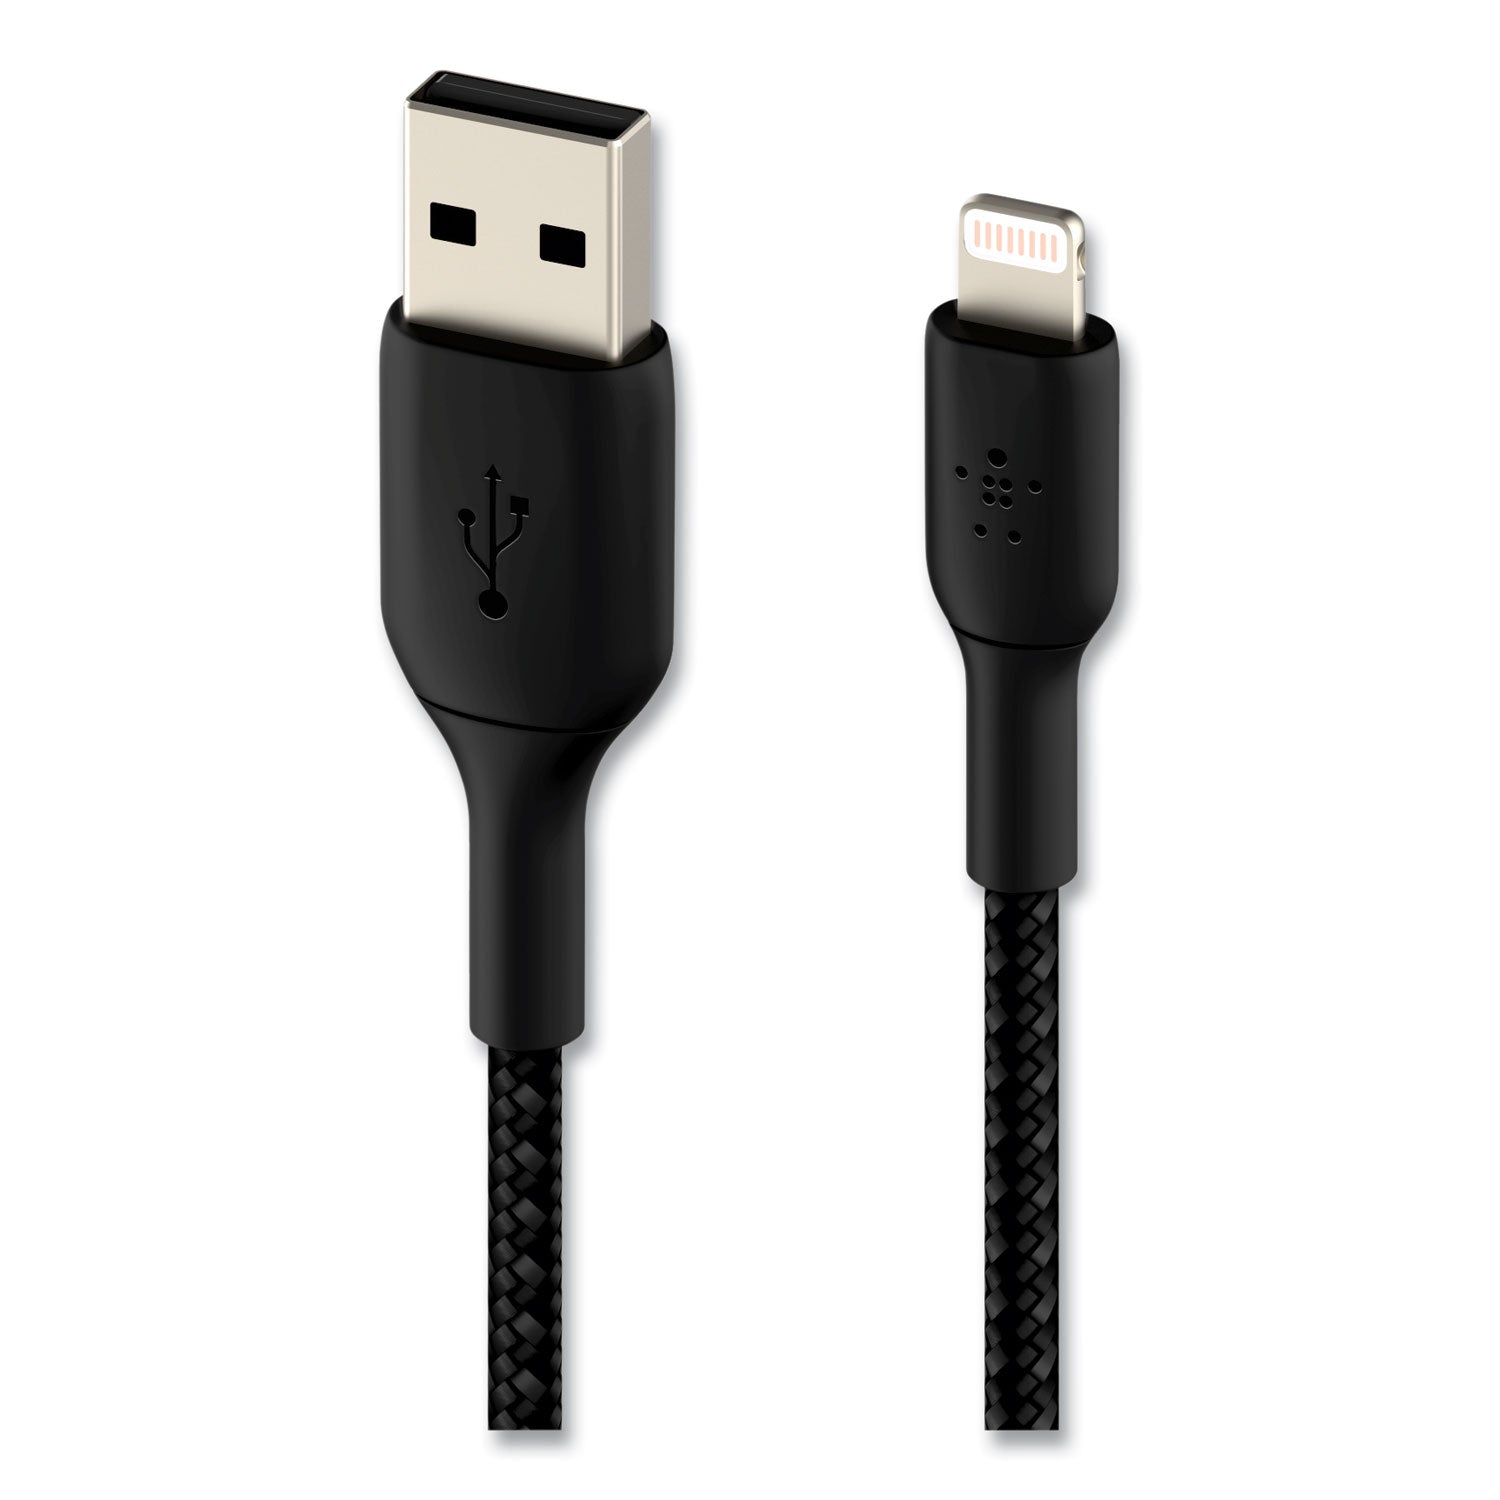 boost-charge-braided-apple-lightning-to-usb-a-chargesync-cable-66-ft-black_blkcaa002bt2mbk - 3